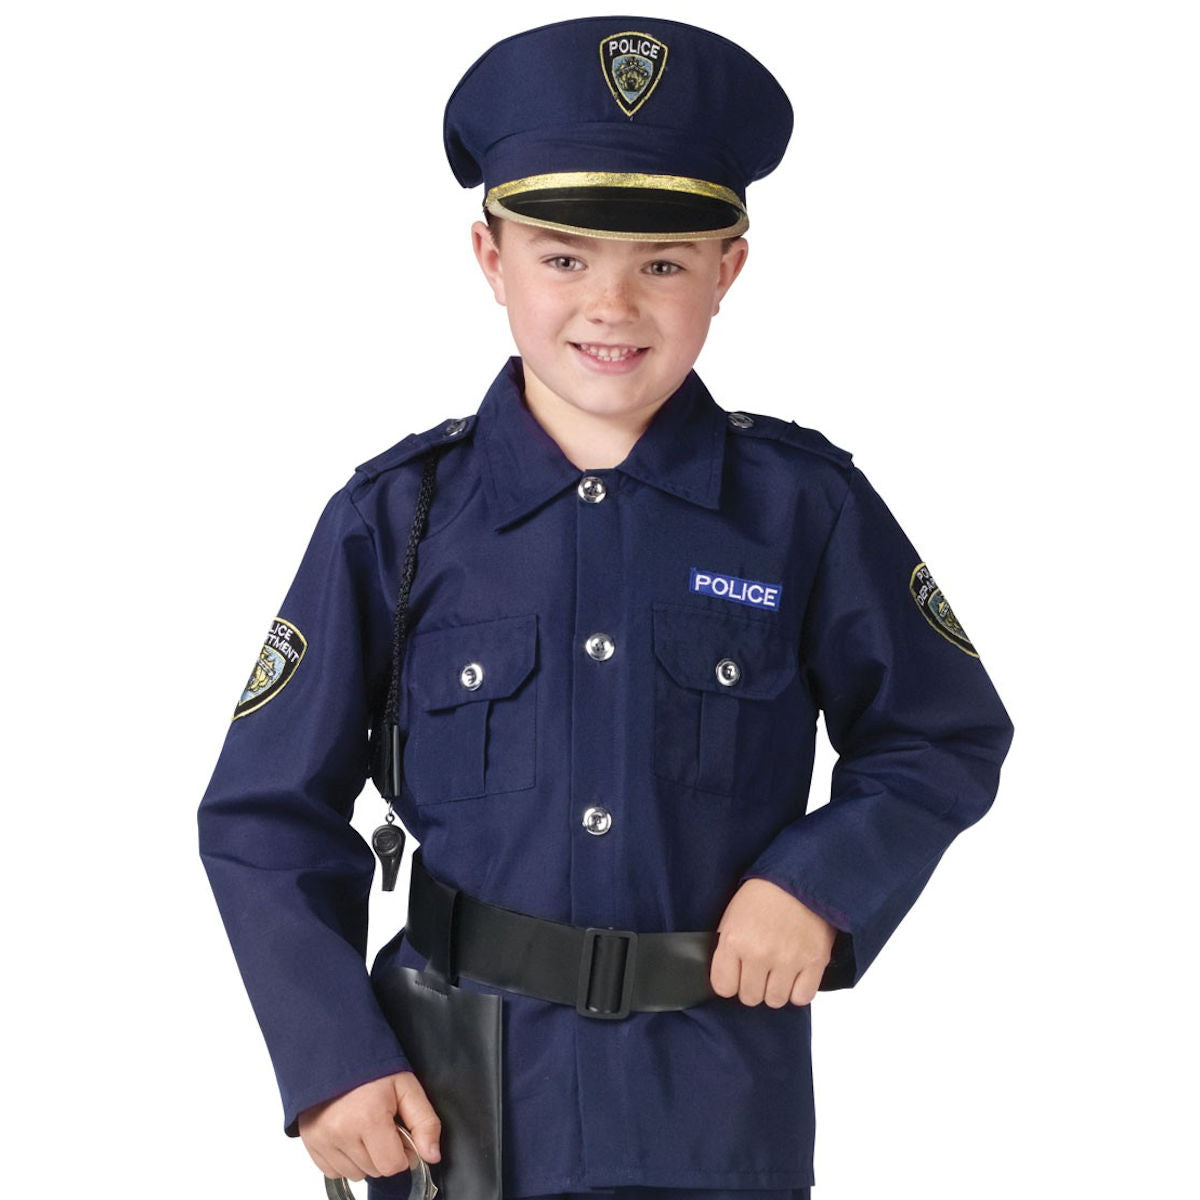 Policeman Deluxe Police Boy's fancy Dress Costume complete with hat